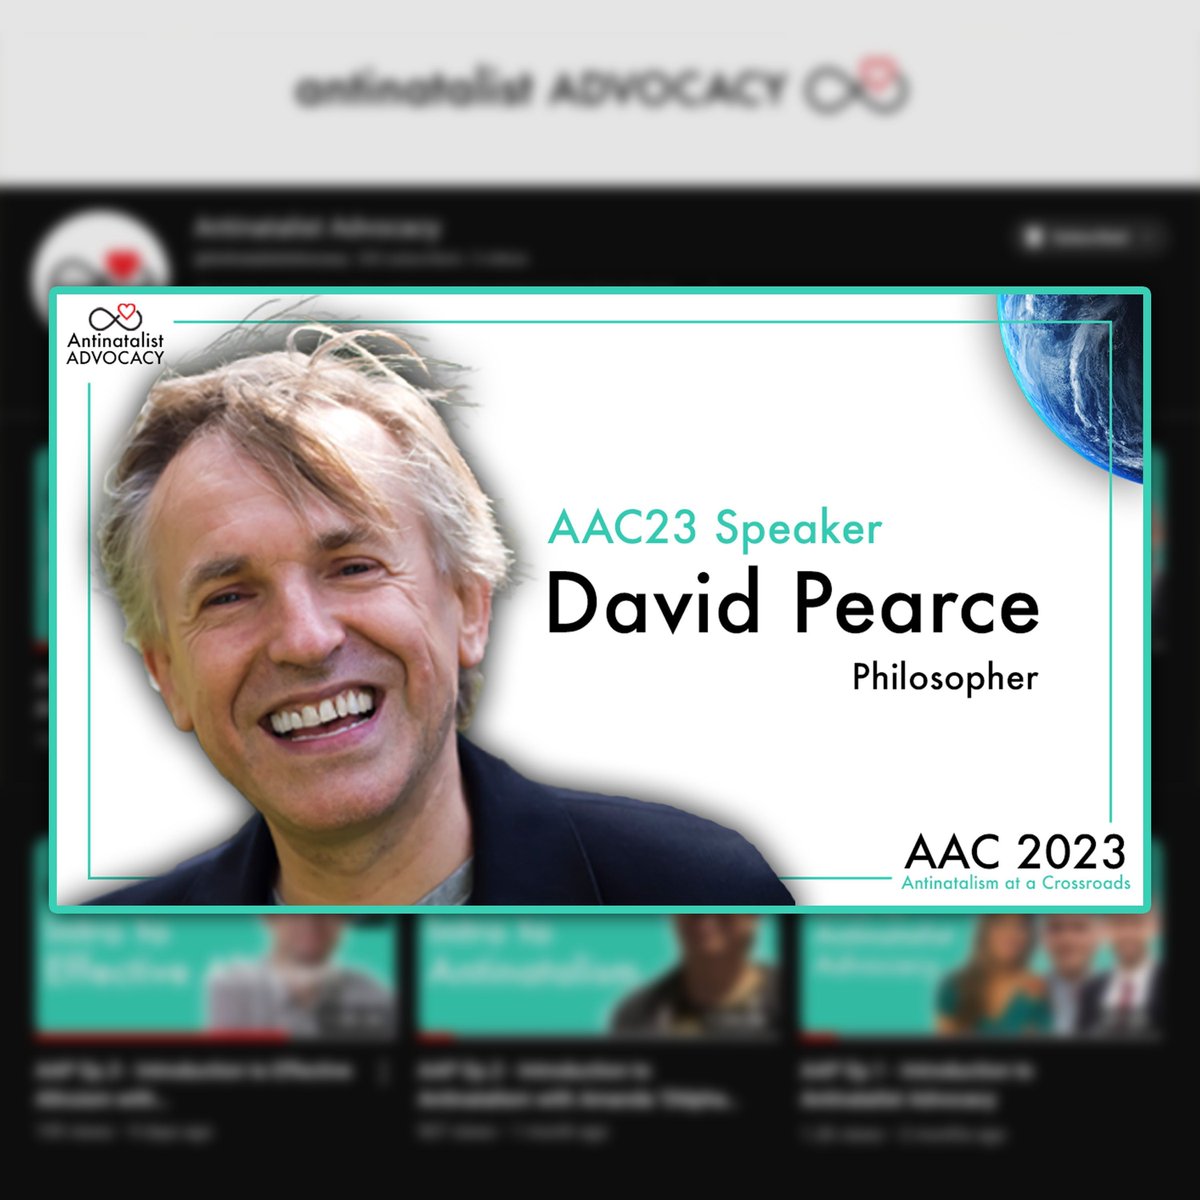 Our first speaker announcement 🎉 DAVID PEARCE (@webmasterdave) will be speaking at AAC23 🔥 Don't miss any updates! Sign-up to our newsletter >> buff.ly/3NL3OD7 <<